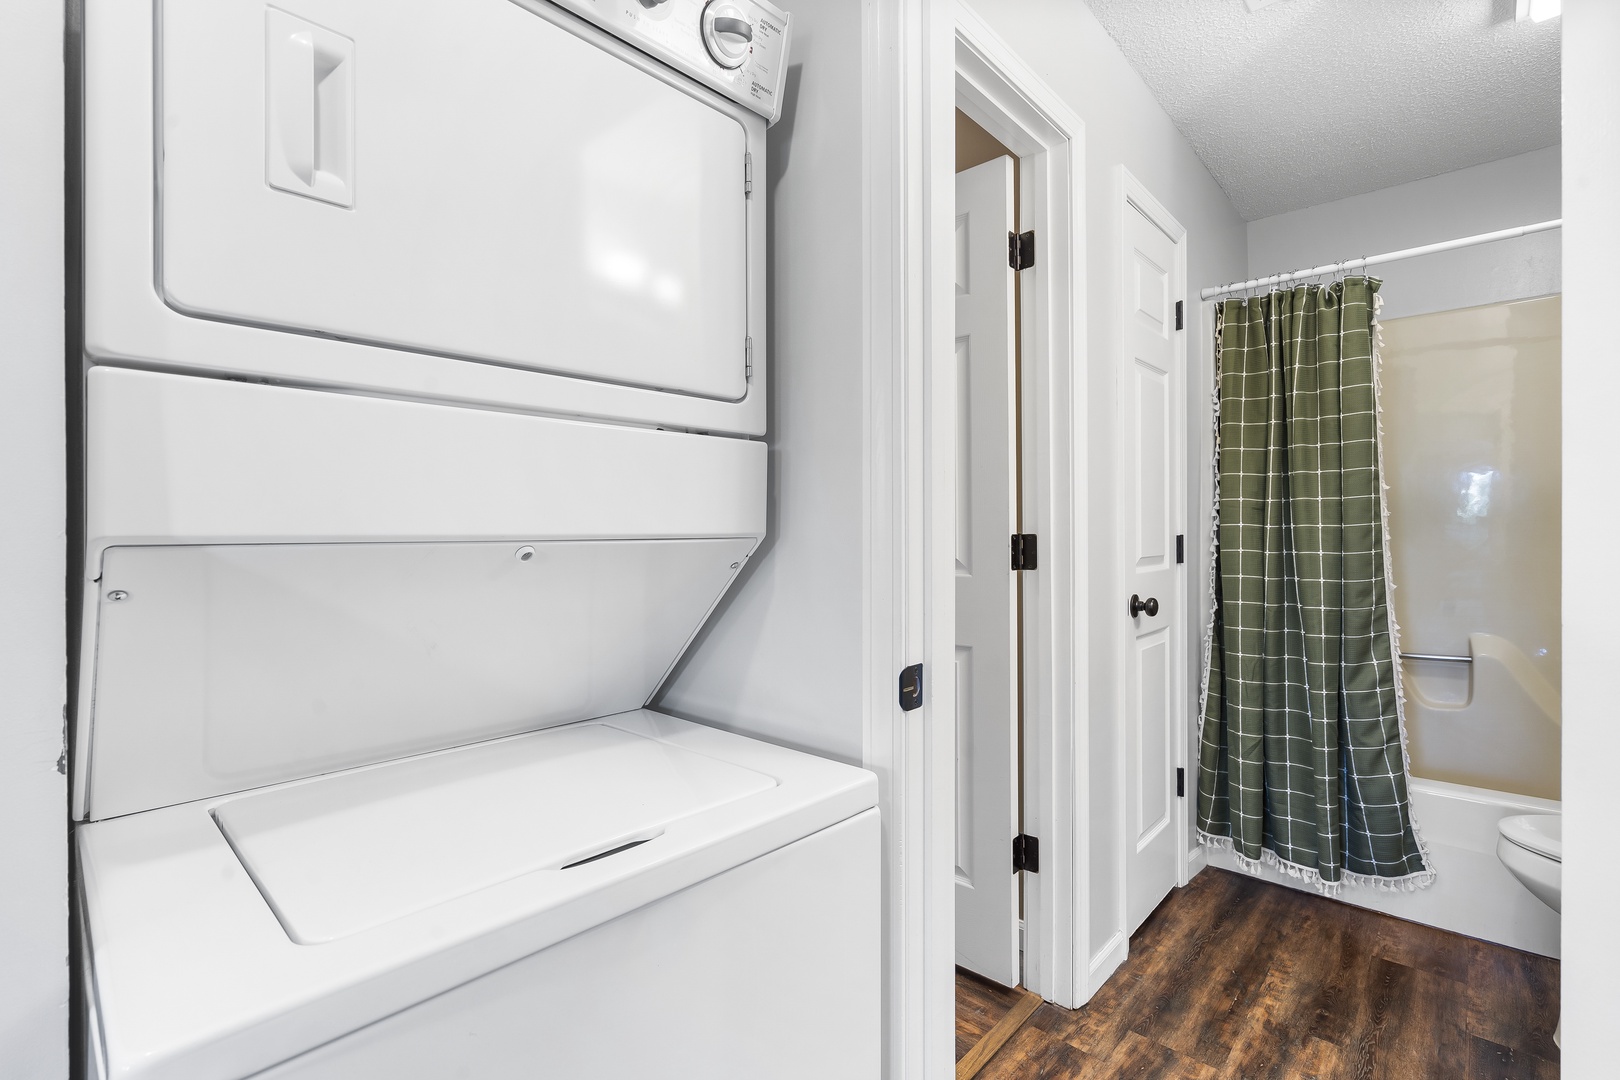 Private laundry is available for your stay, tucked away off the bedroom